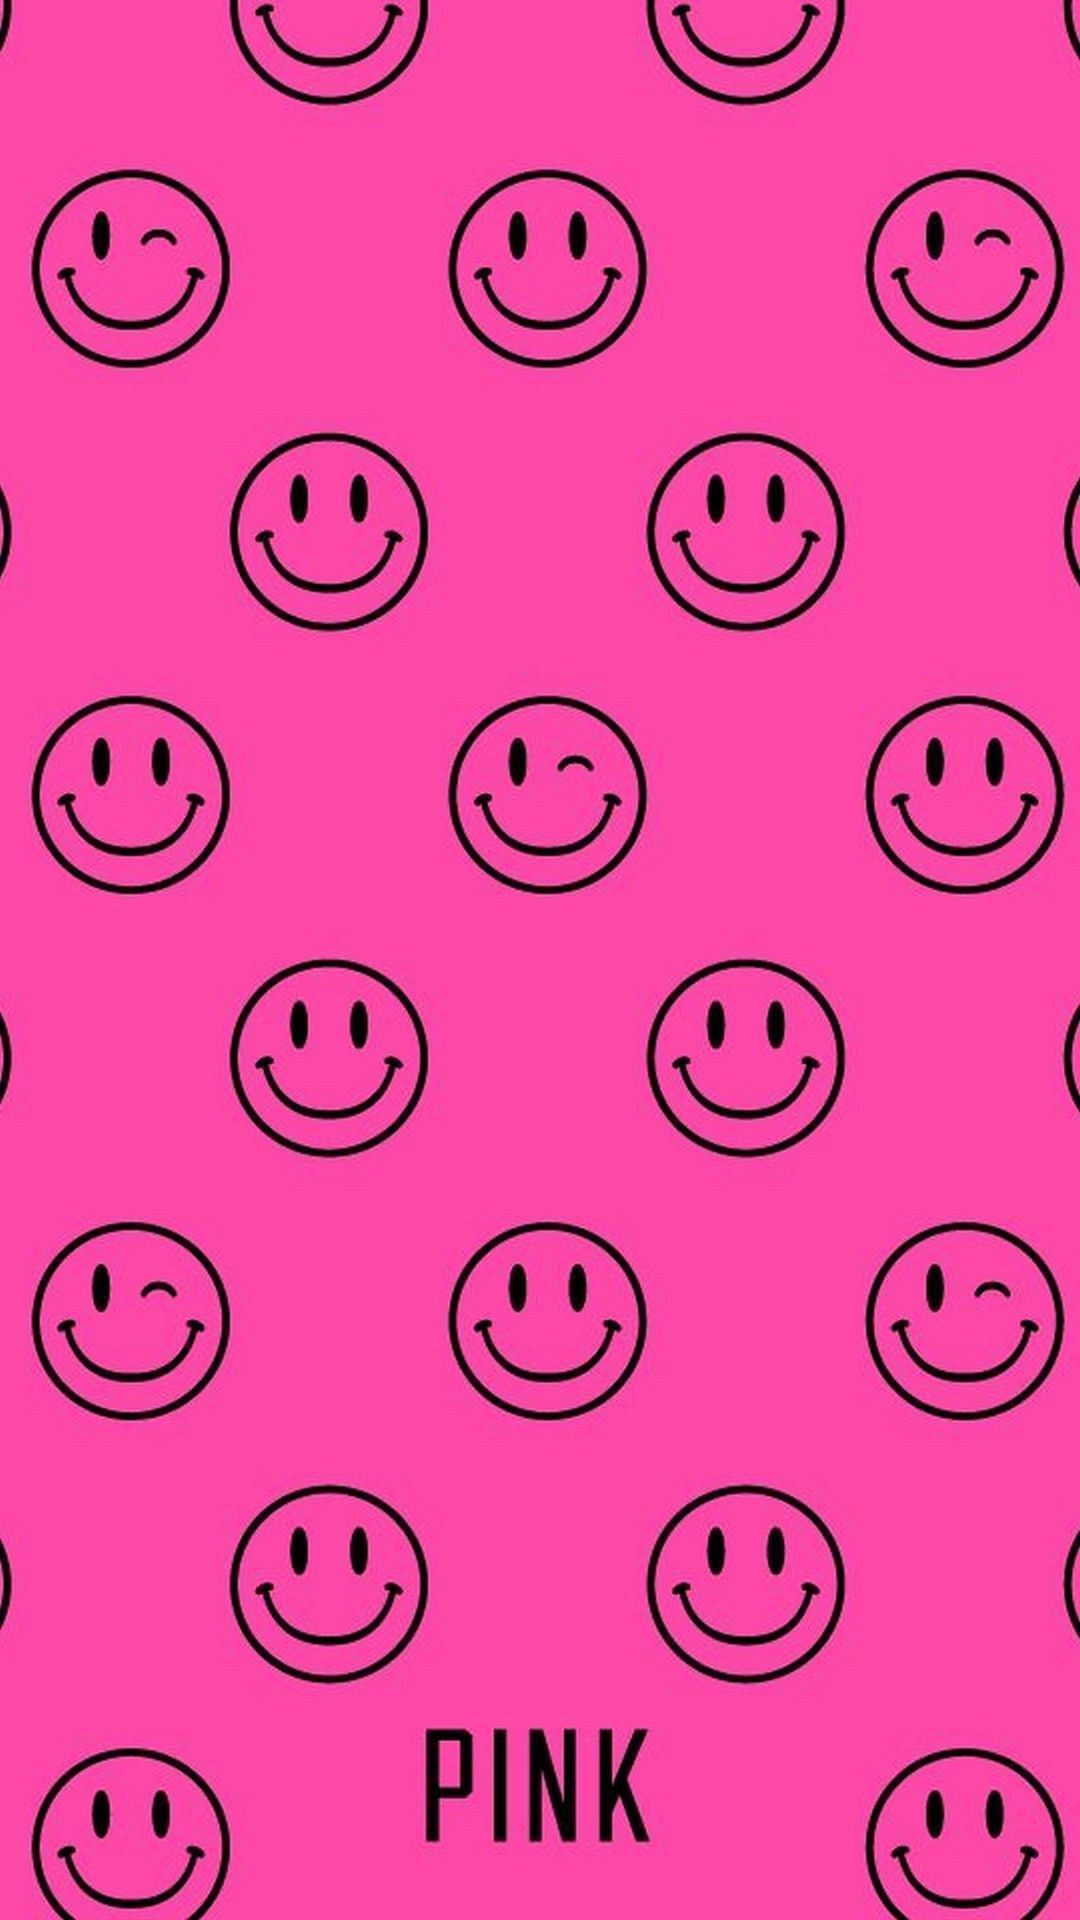 The pink and black smiley face pattern - Emoji